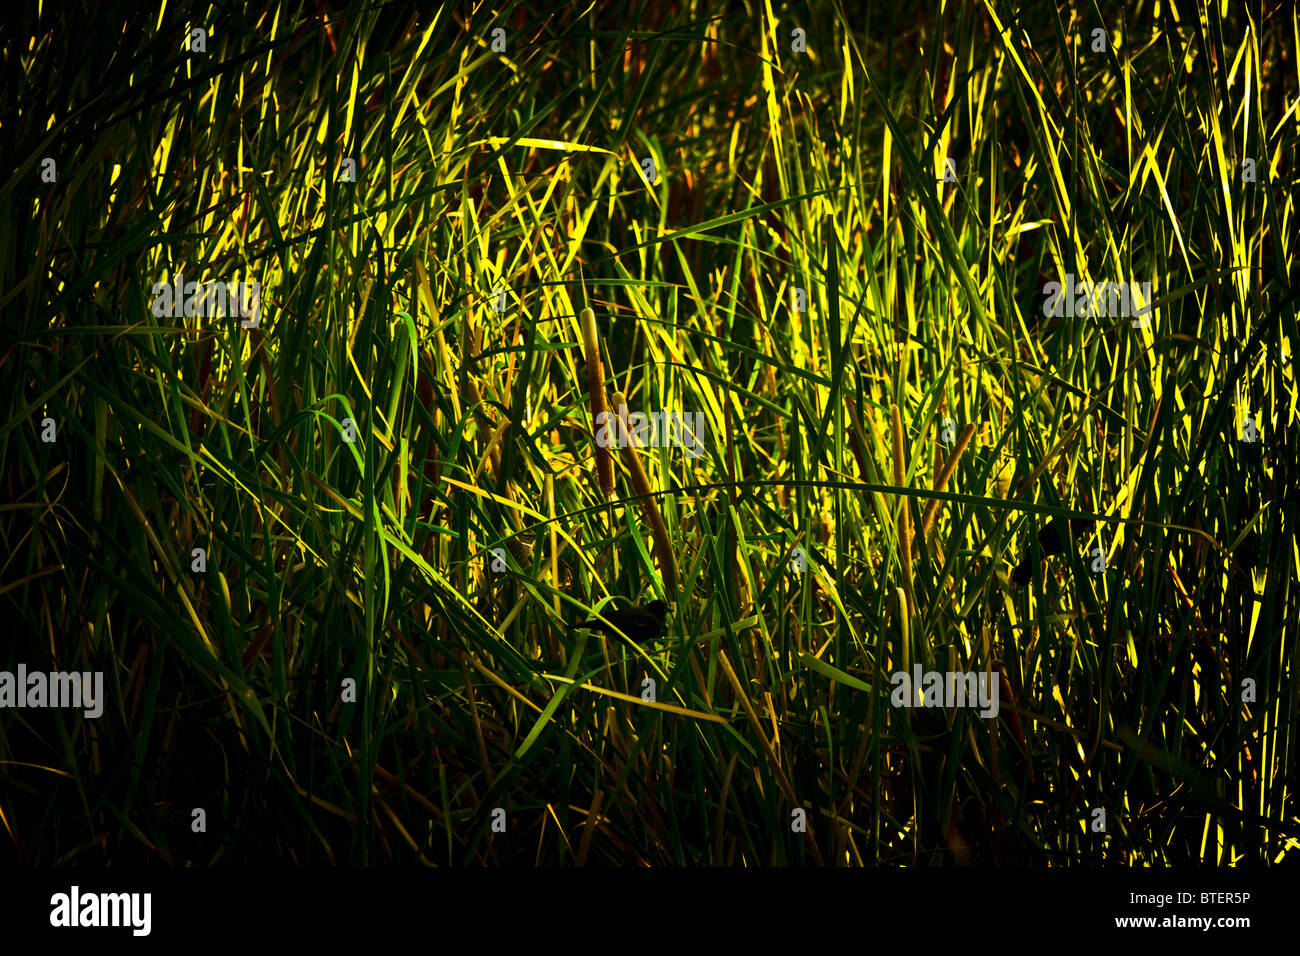 Green Cattail or Typha Typhaceae spp. L. (T. latifolia, T. glauca, T. angustifolia, T. domingensis) Stock Photo